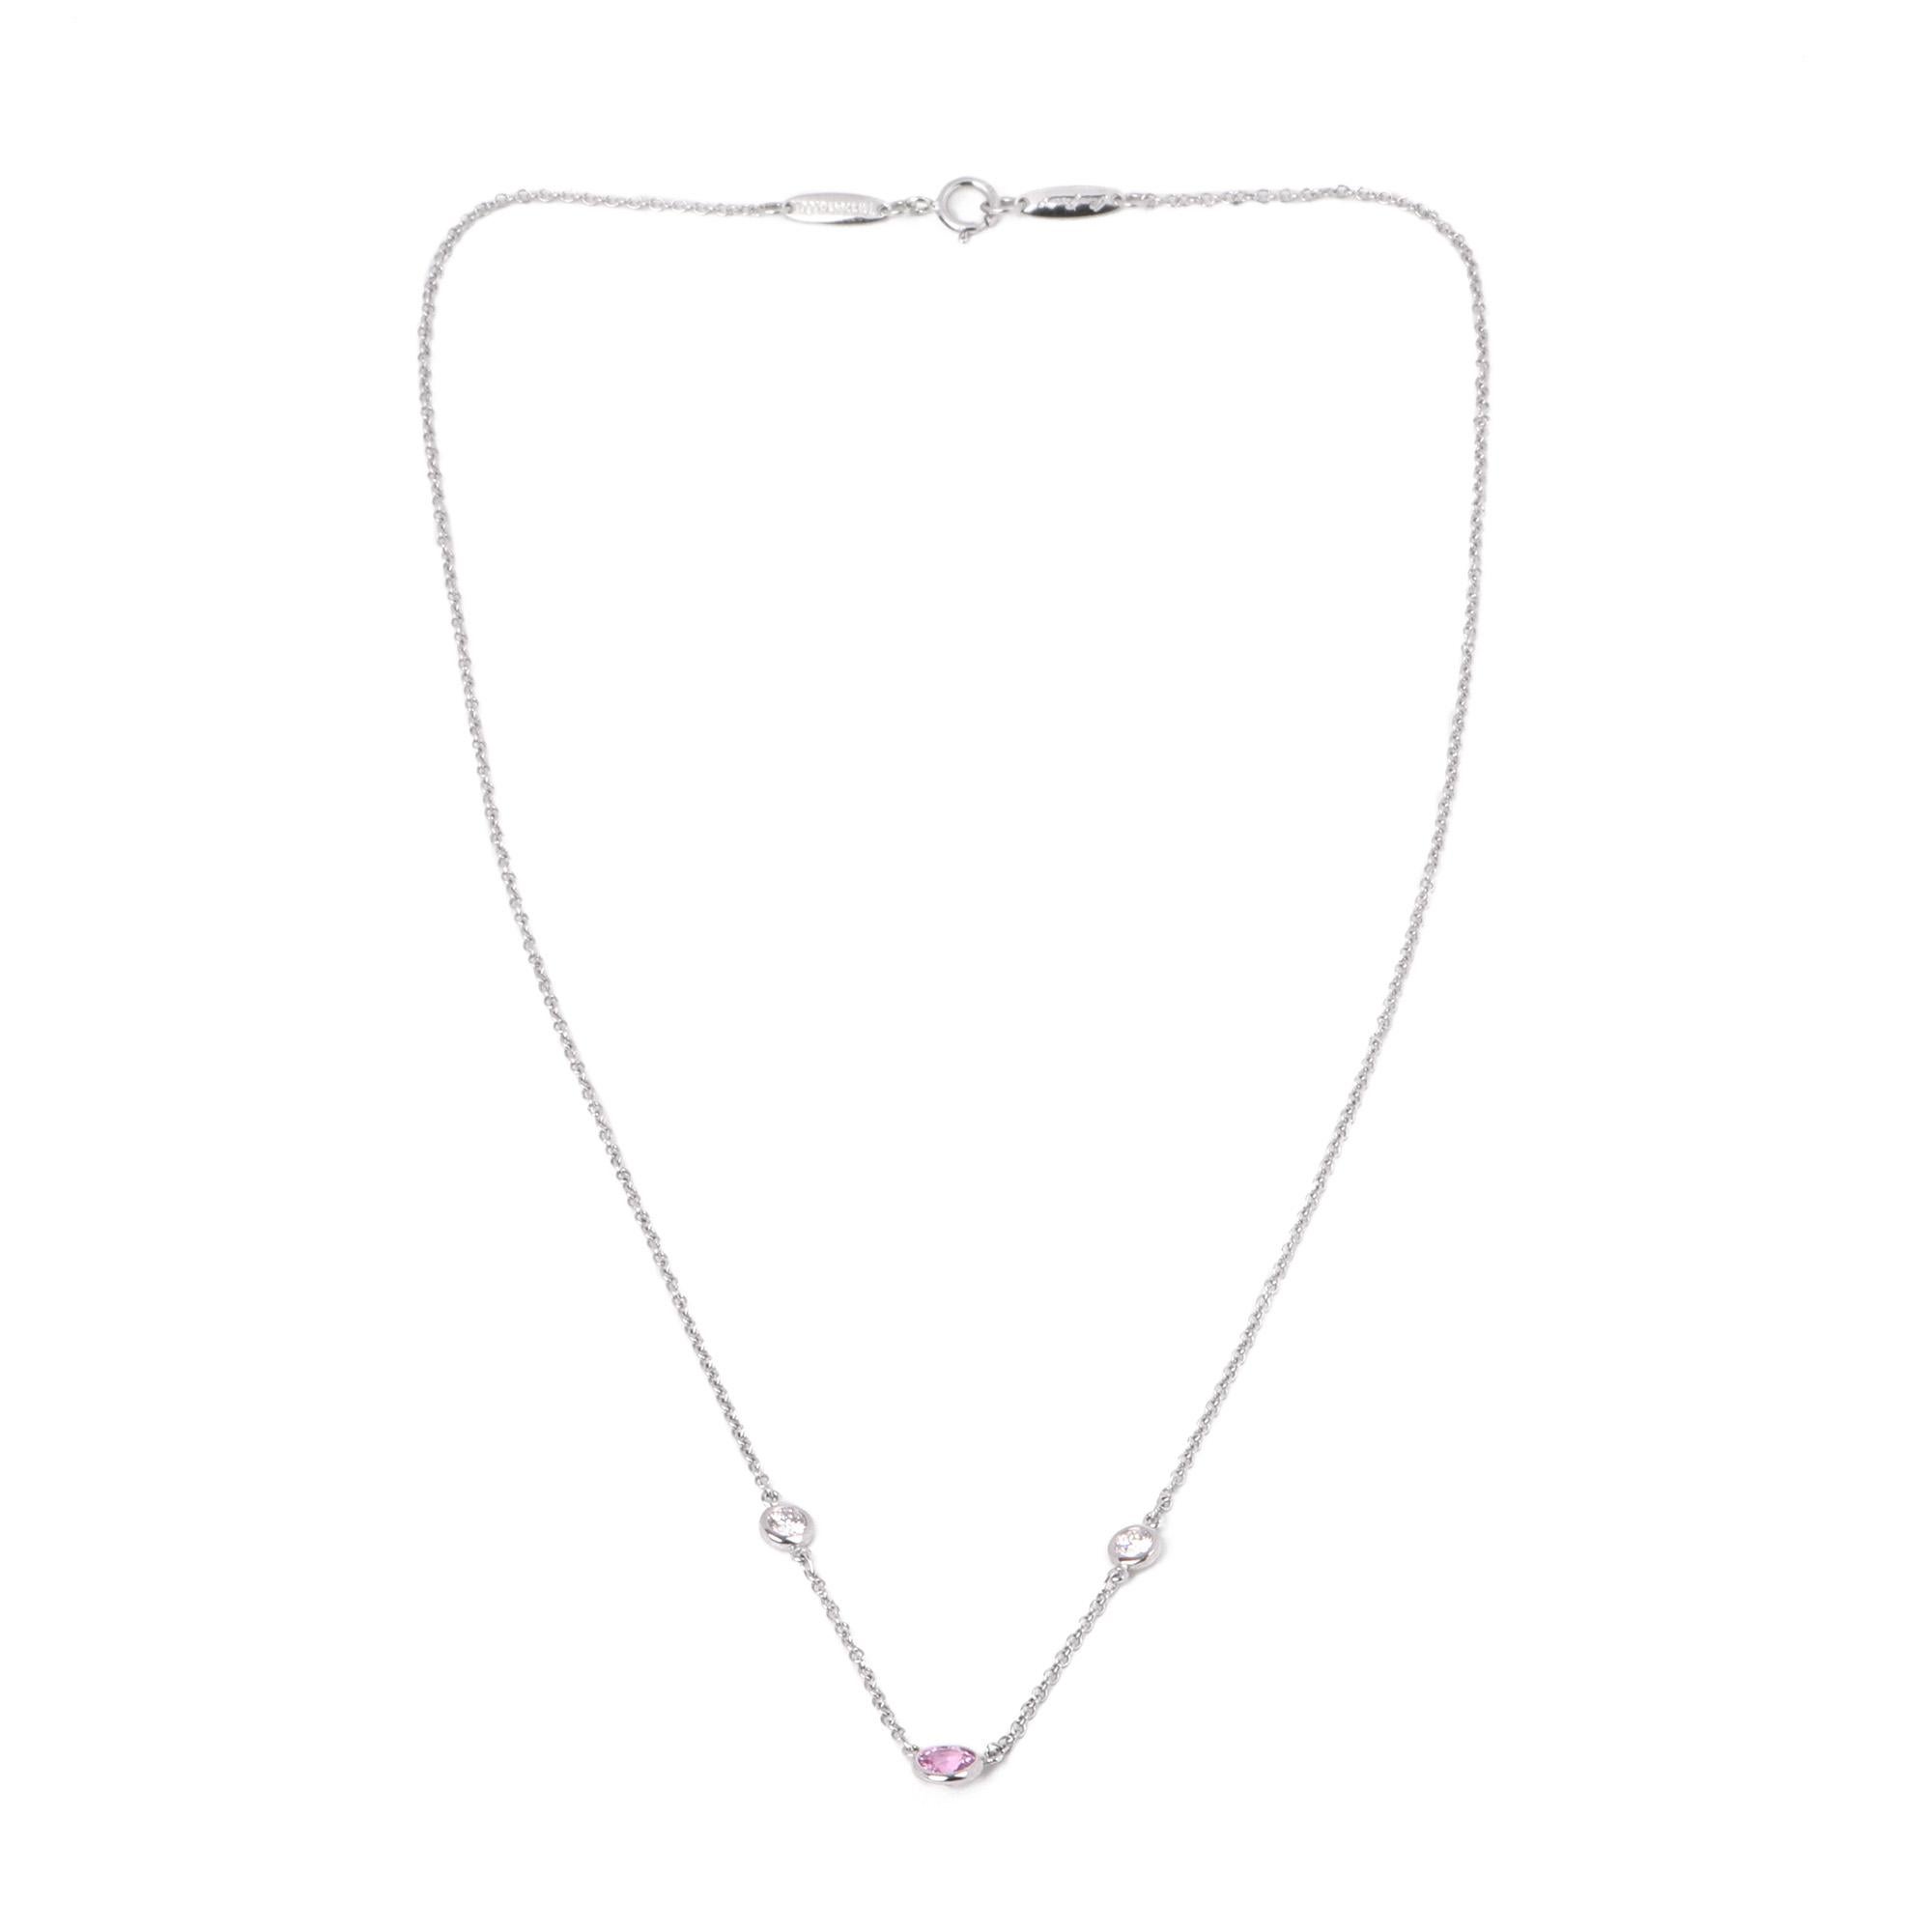 Round Cut Tiffany & Co. Colours by the Yard Pink Sapphire and Diamond Necklace